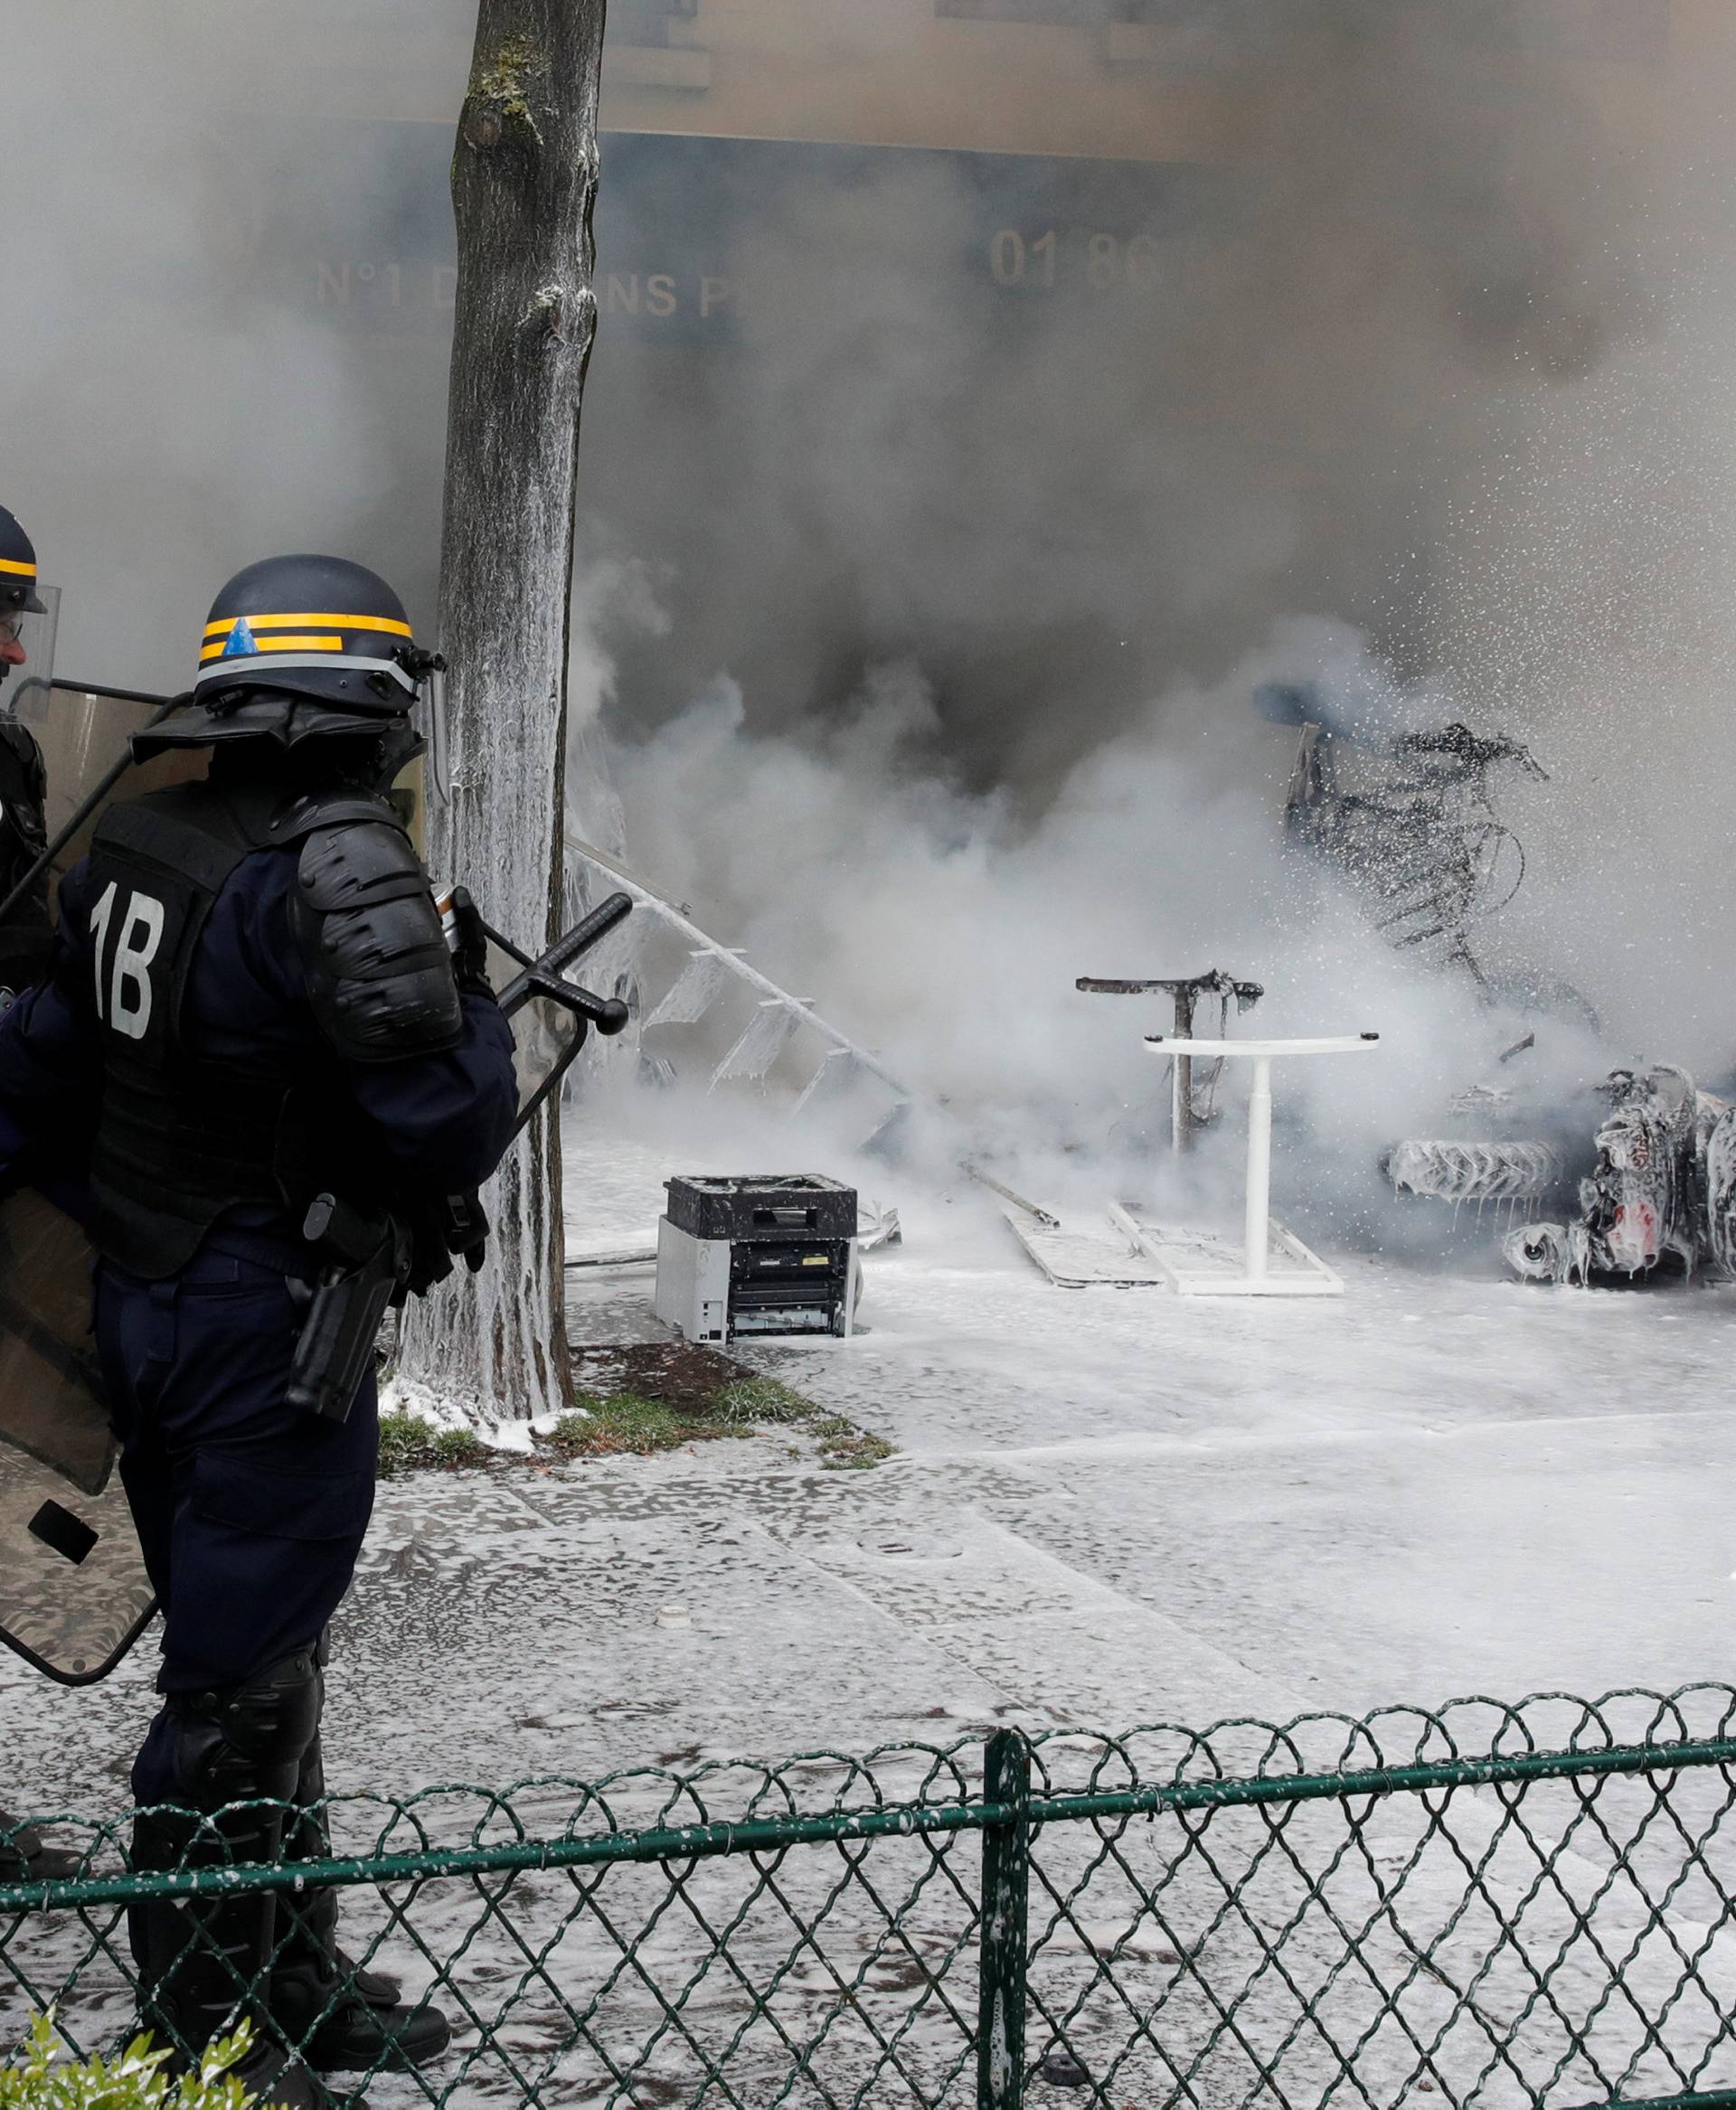 French CRS riot police take position near smoking remains of a vehicle outside a Renault garage during clashes at the May Day labour union march in Paris